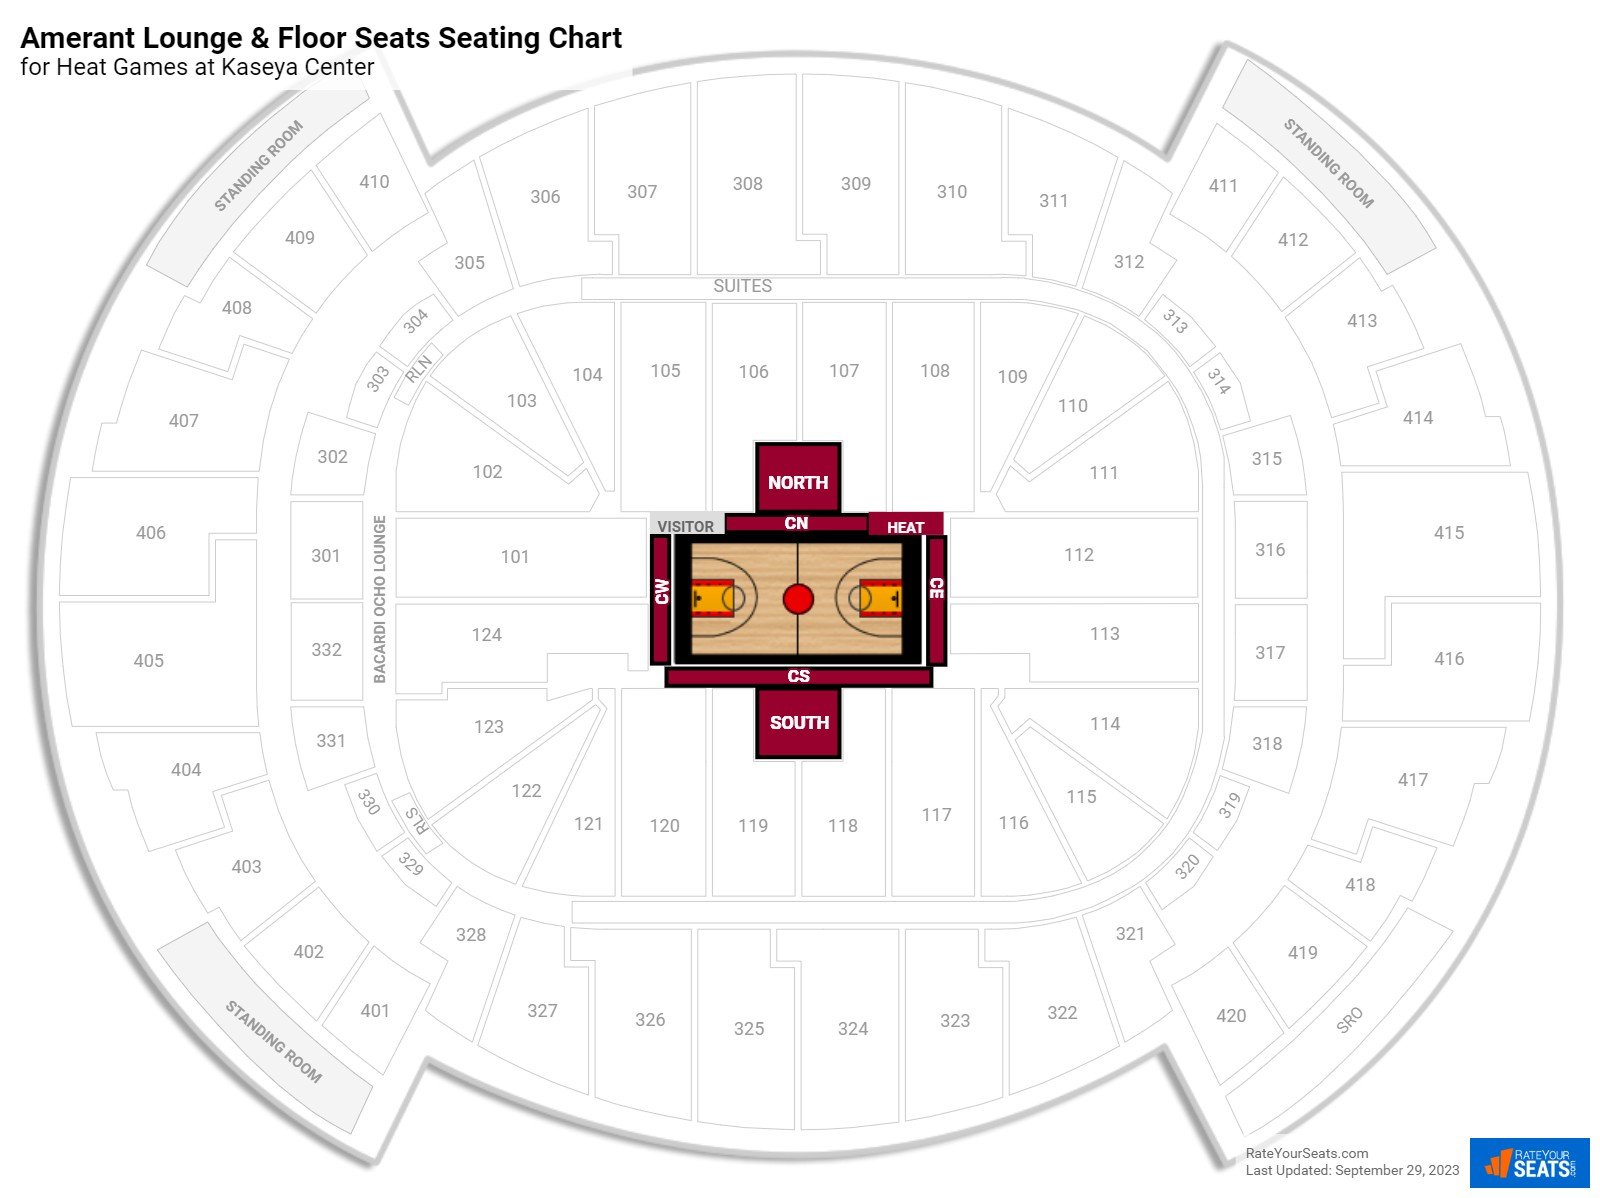 Heat AmericanAirlines Lounge & Floor Seats Seating Chart at Miami-Dade Arena